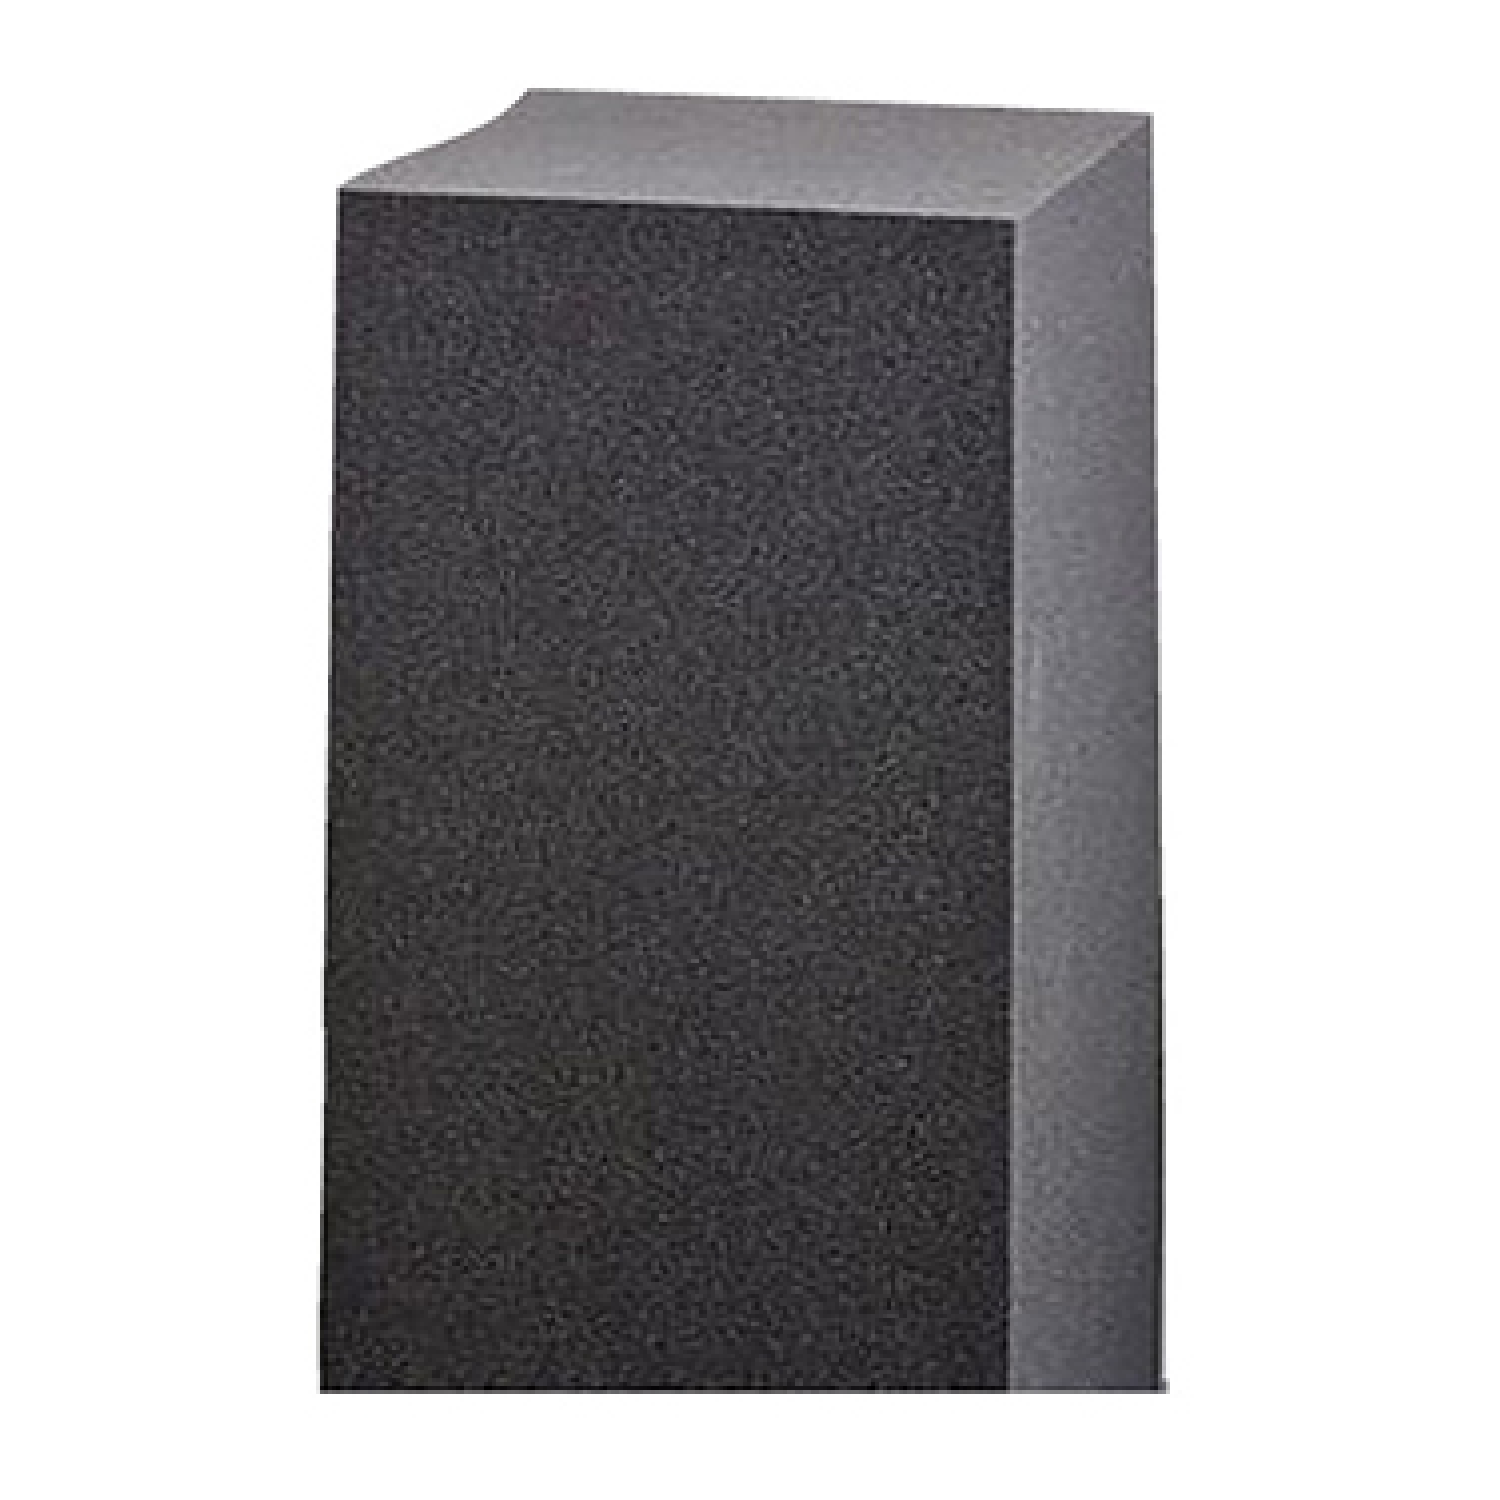 Bass Trap 12 Inches x 12 Inches x 48 Inches   BT Type4 studio solution